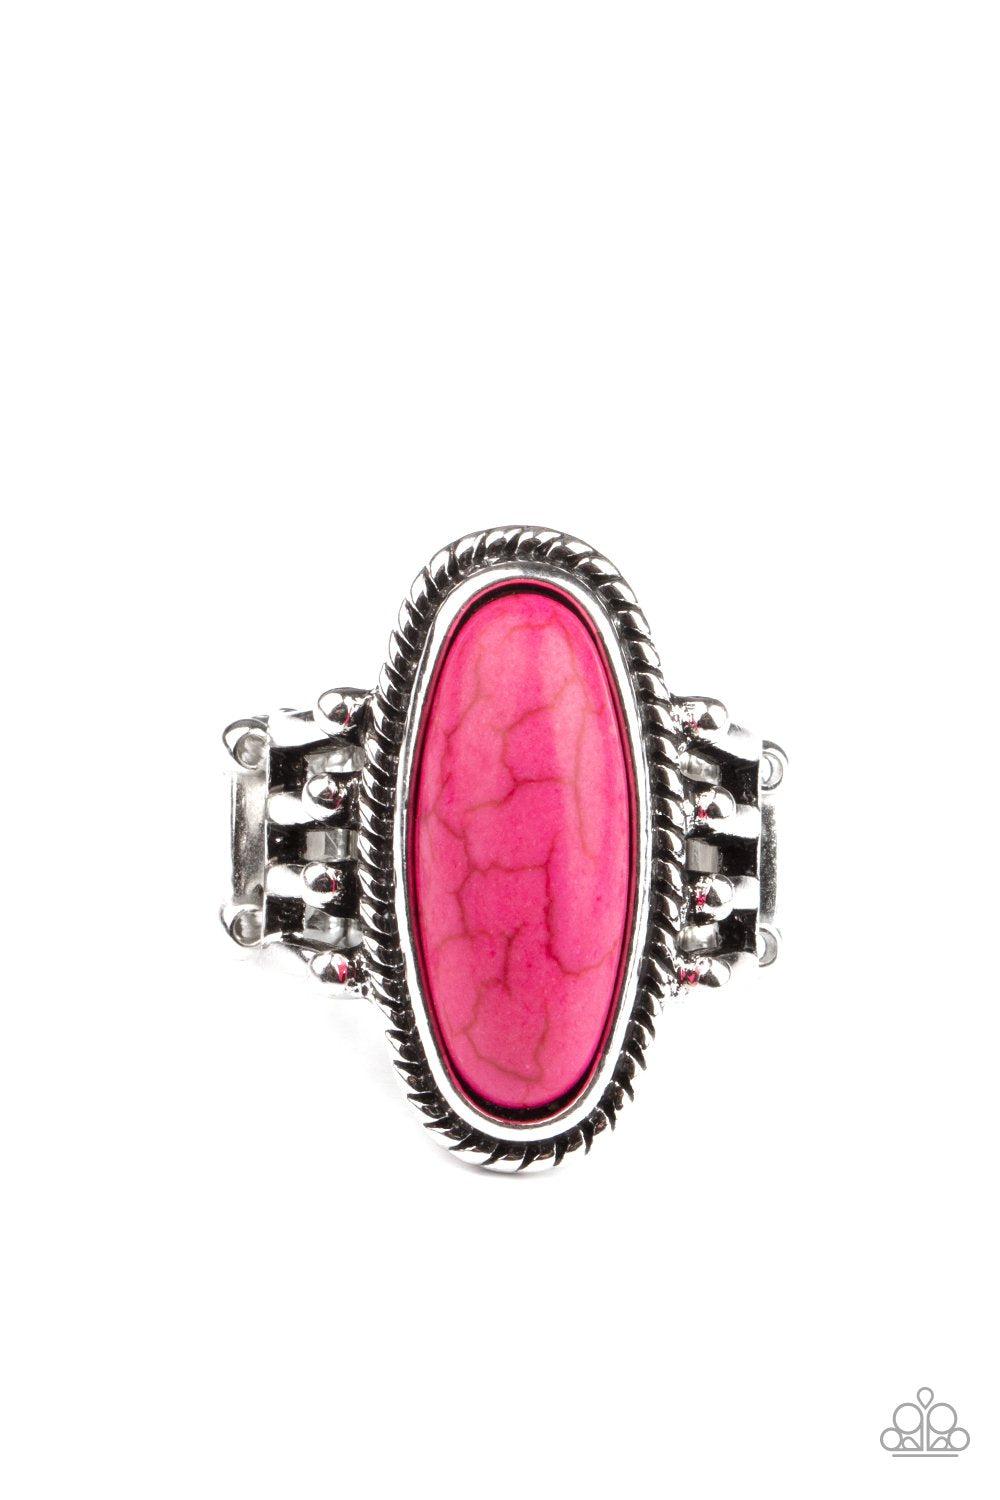 Home On The RANCH Pink Stone Ring - Paparazzi Accessories- lightbox - CarasShop.com - $5 Jewelry by Cara Jewels